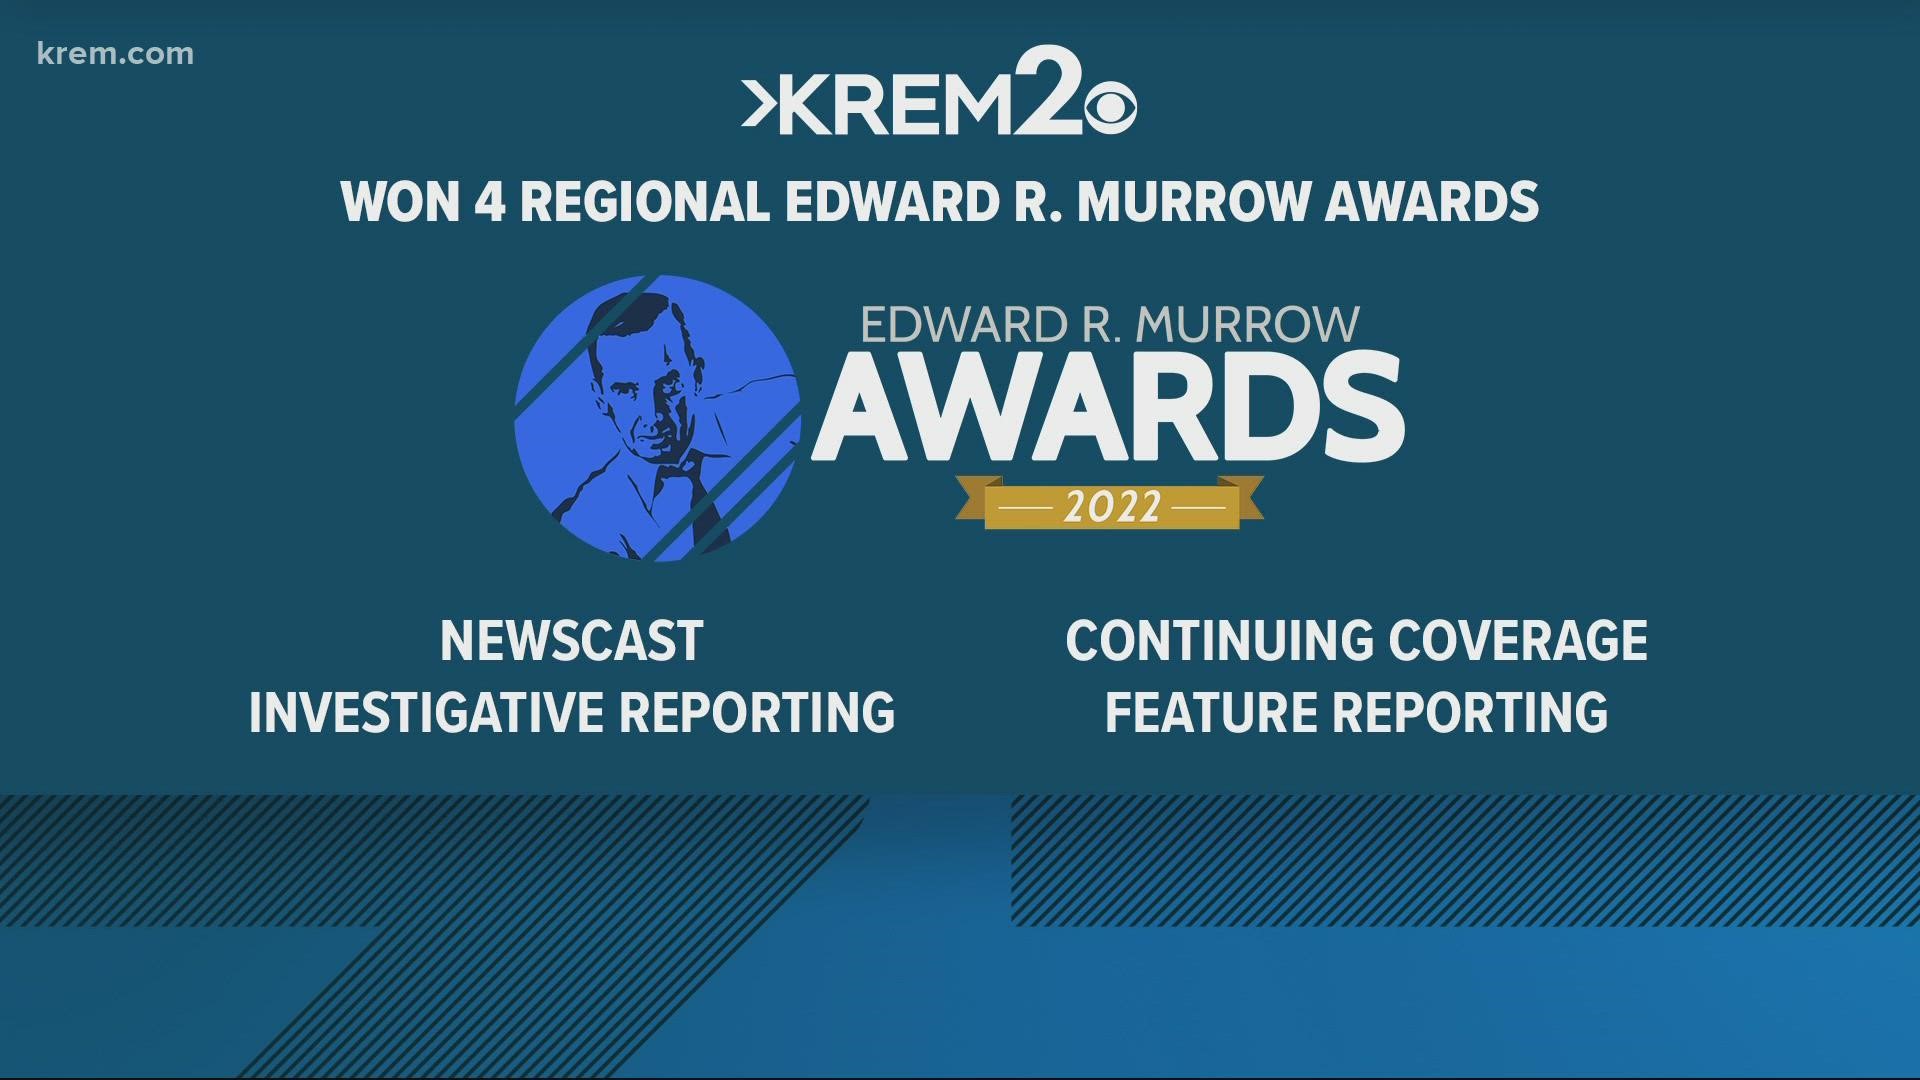 KREM took home awards for continuing coverage, as well as feature and investigative reporting.